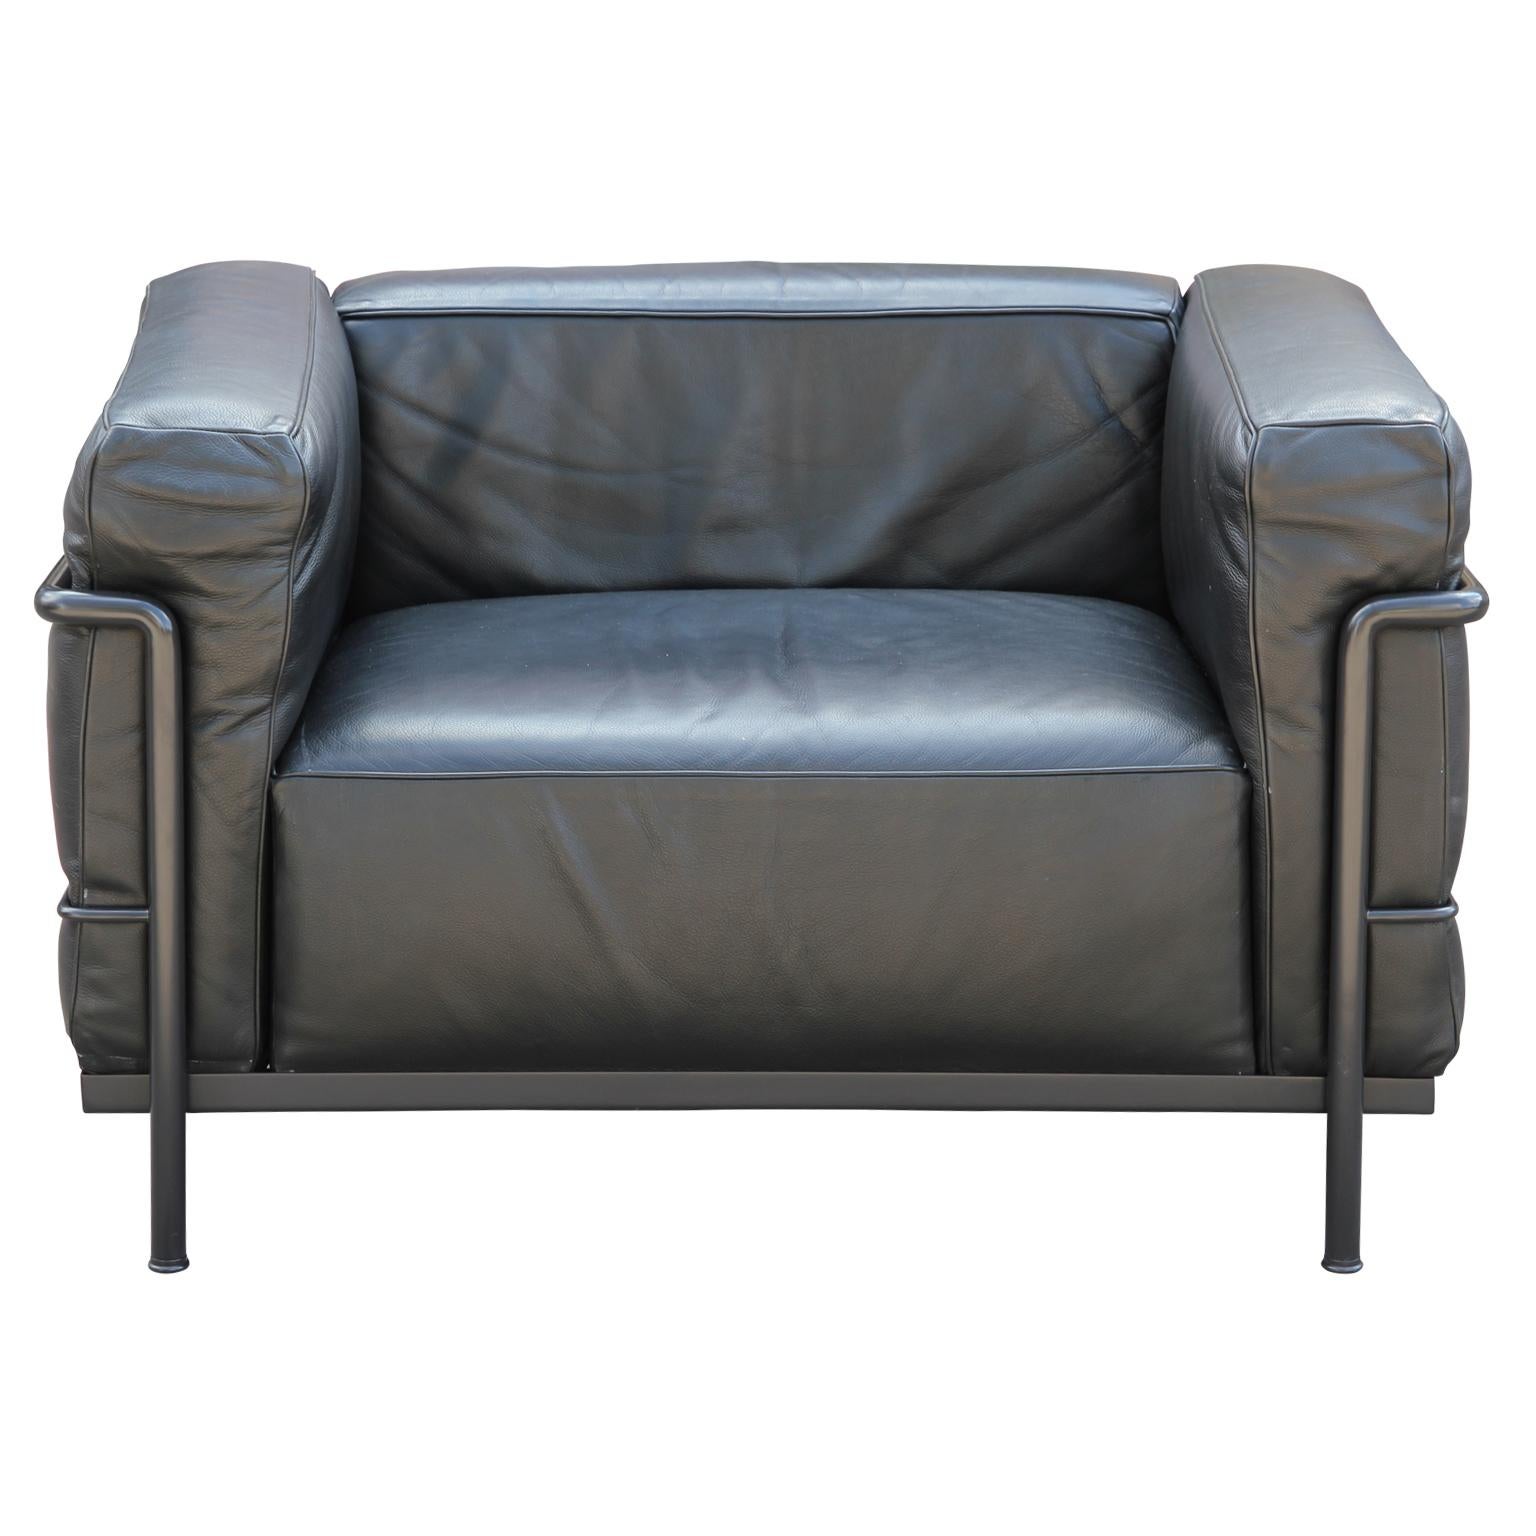 Unique LC3 Le Corbusier armchair with black leather cushions and matte black framing. The Le Corbusier group referred to their LC3 collections as 